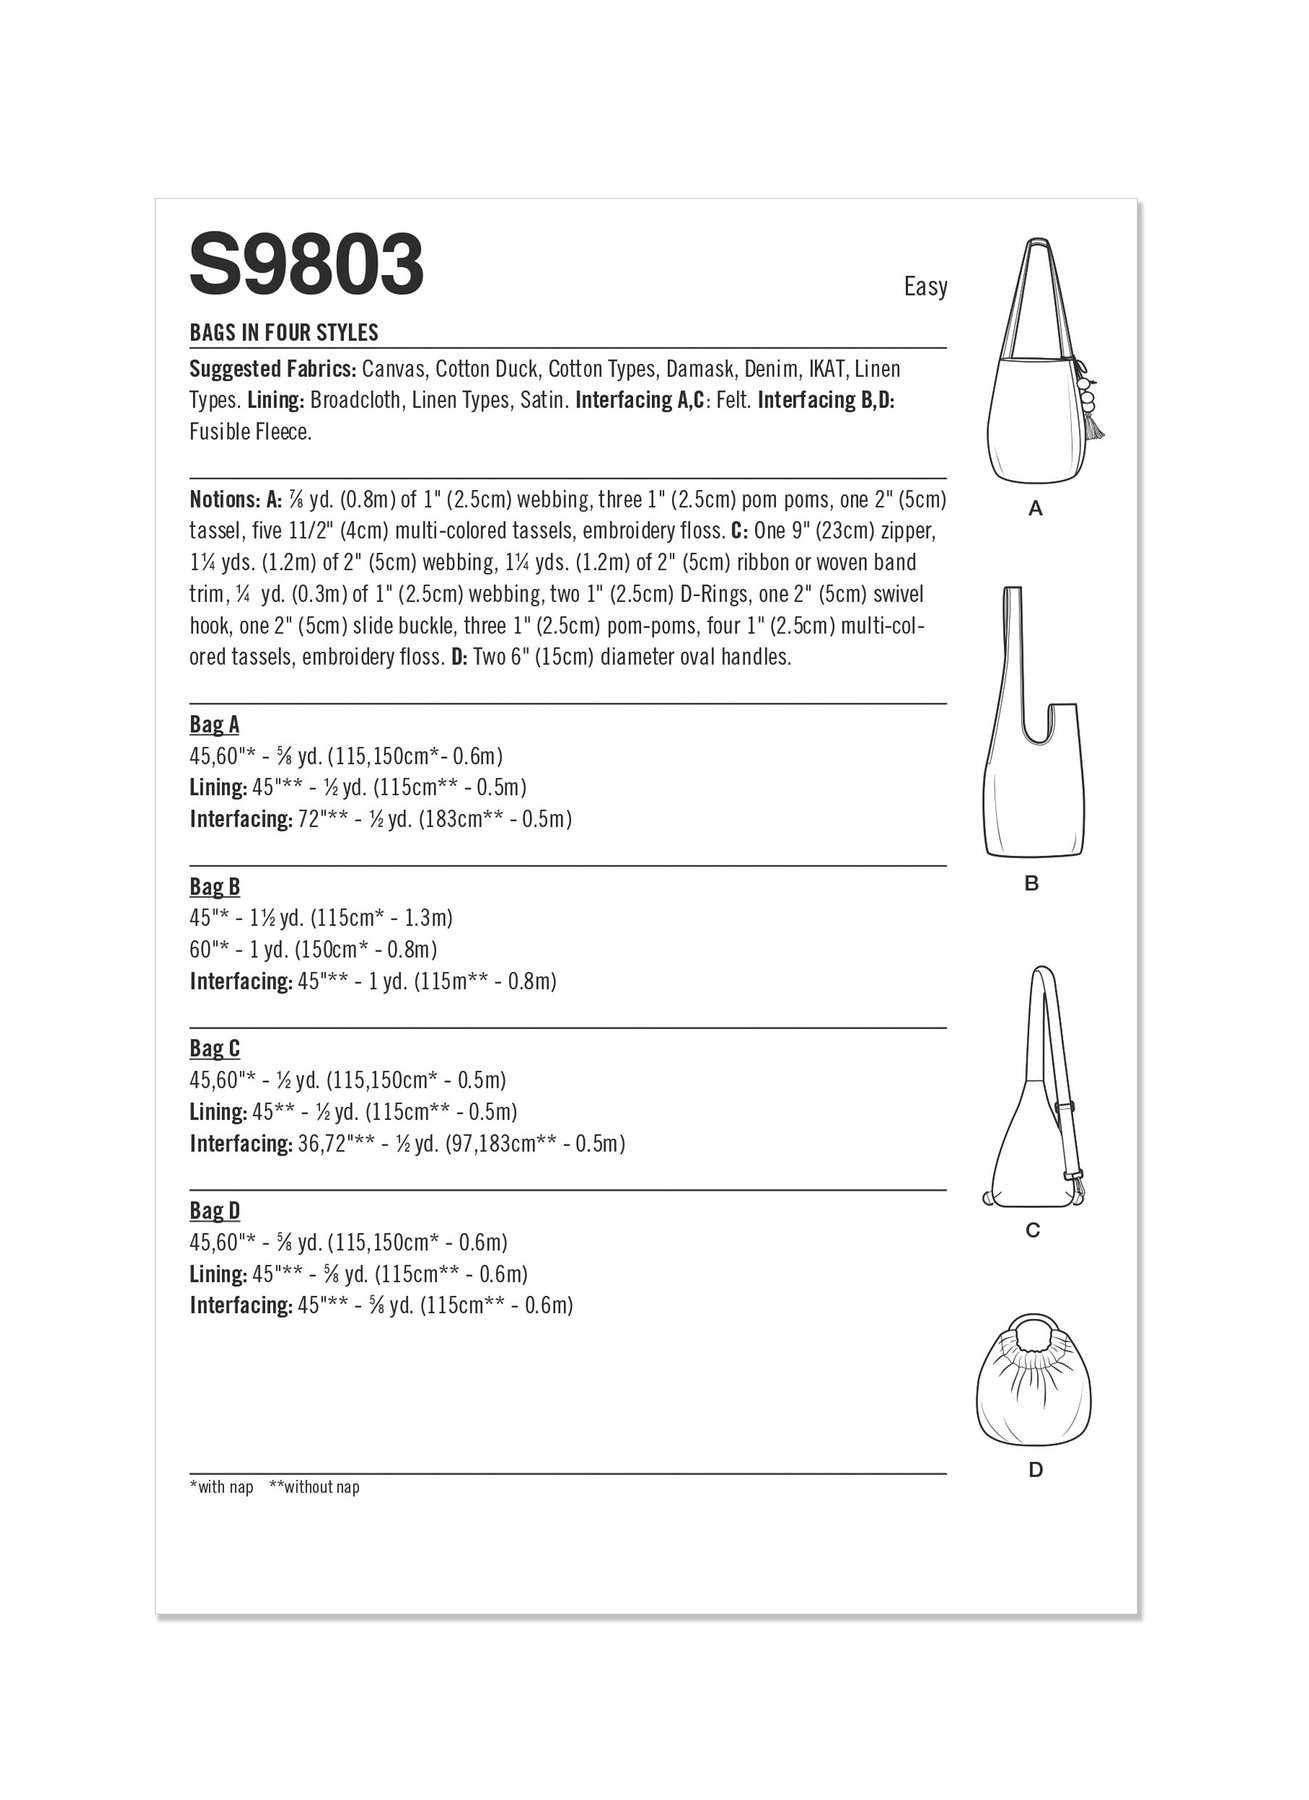 Simplicity Sewing Pattern 9803 - Bags in Four Styles by Elaine Heigl Designs, Size: OS (One Size) - image 2 of 6